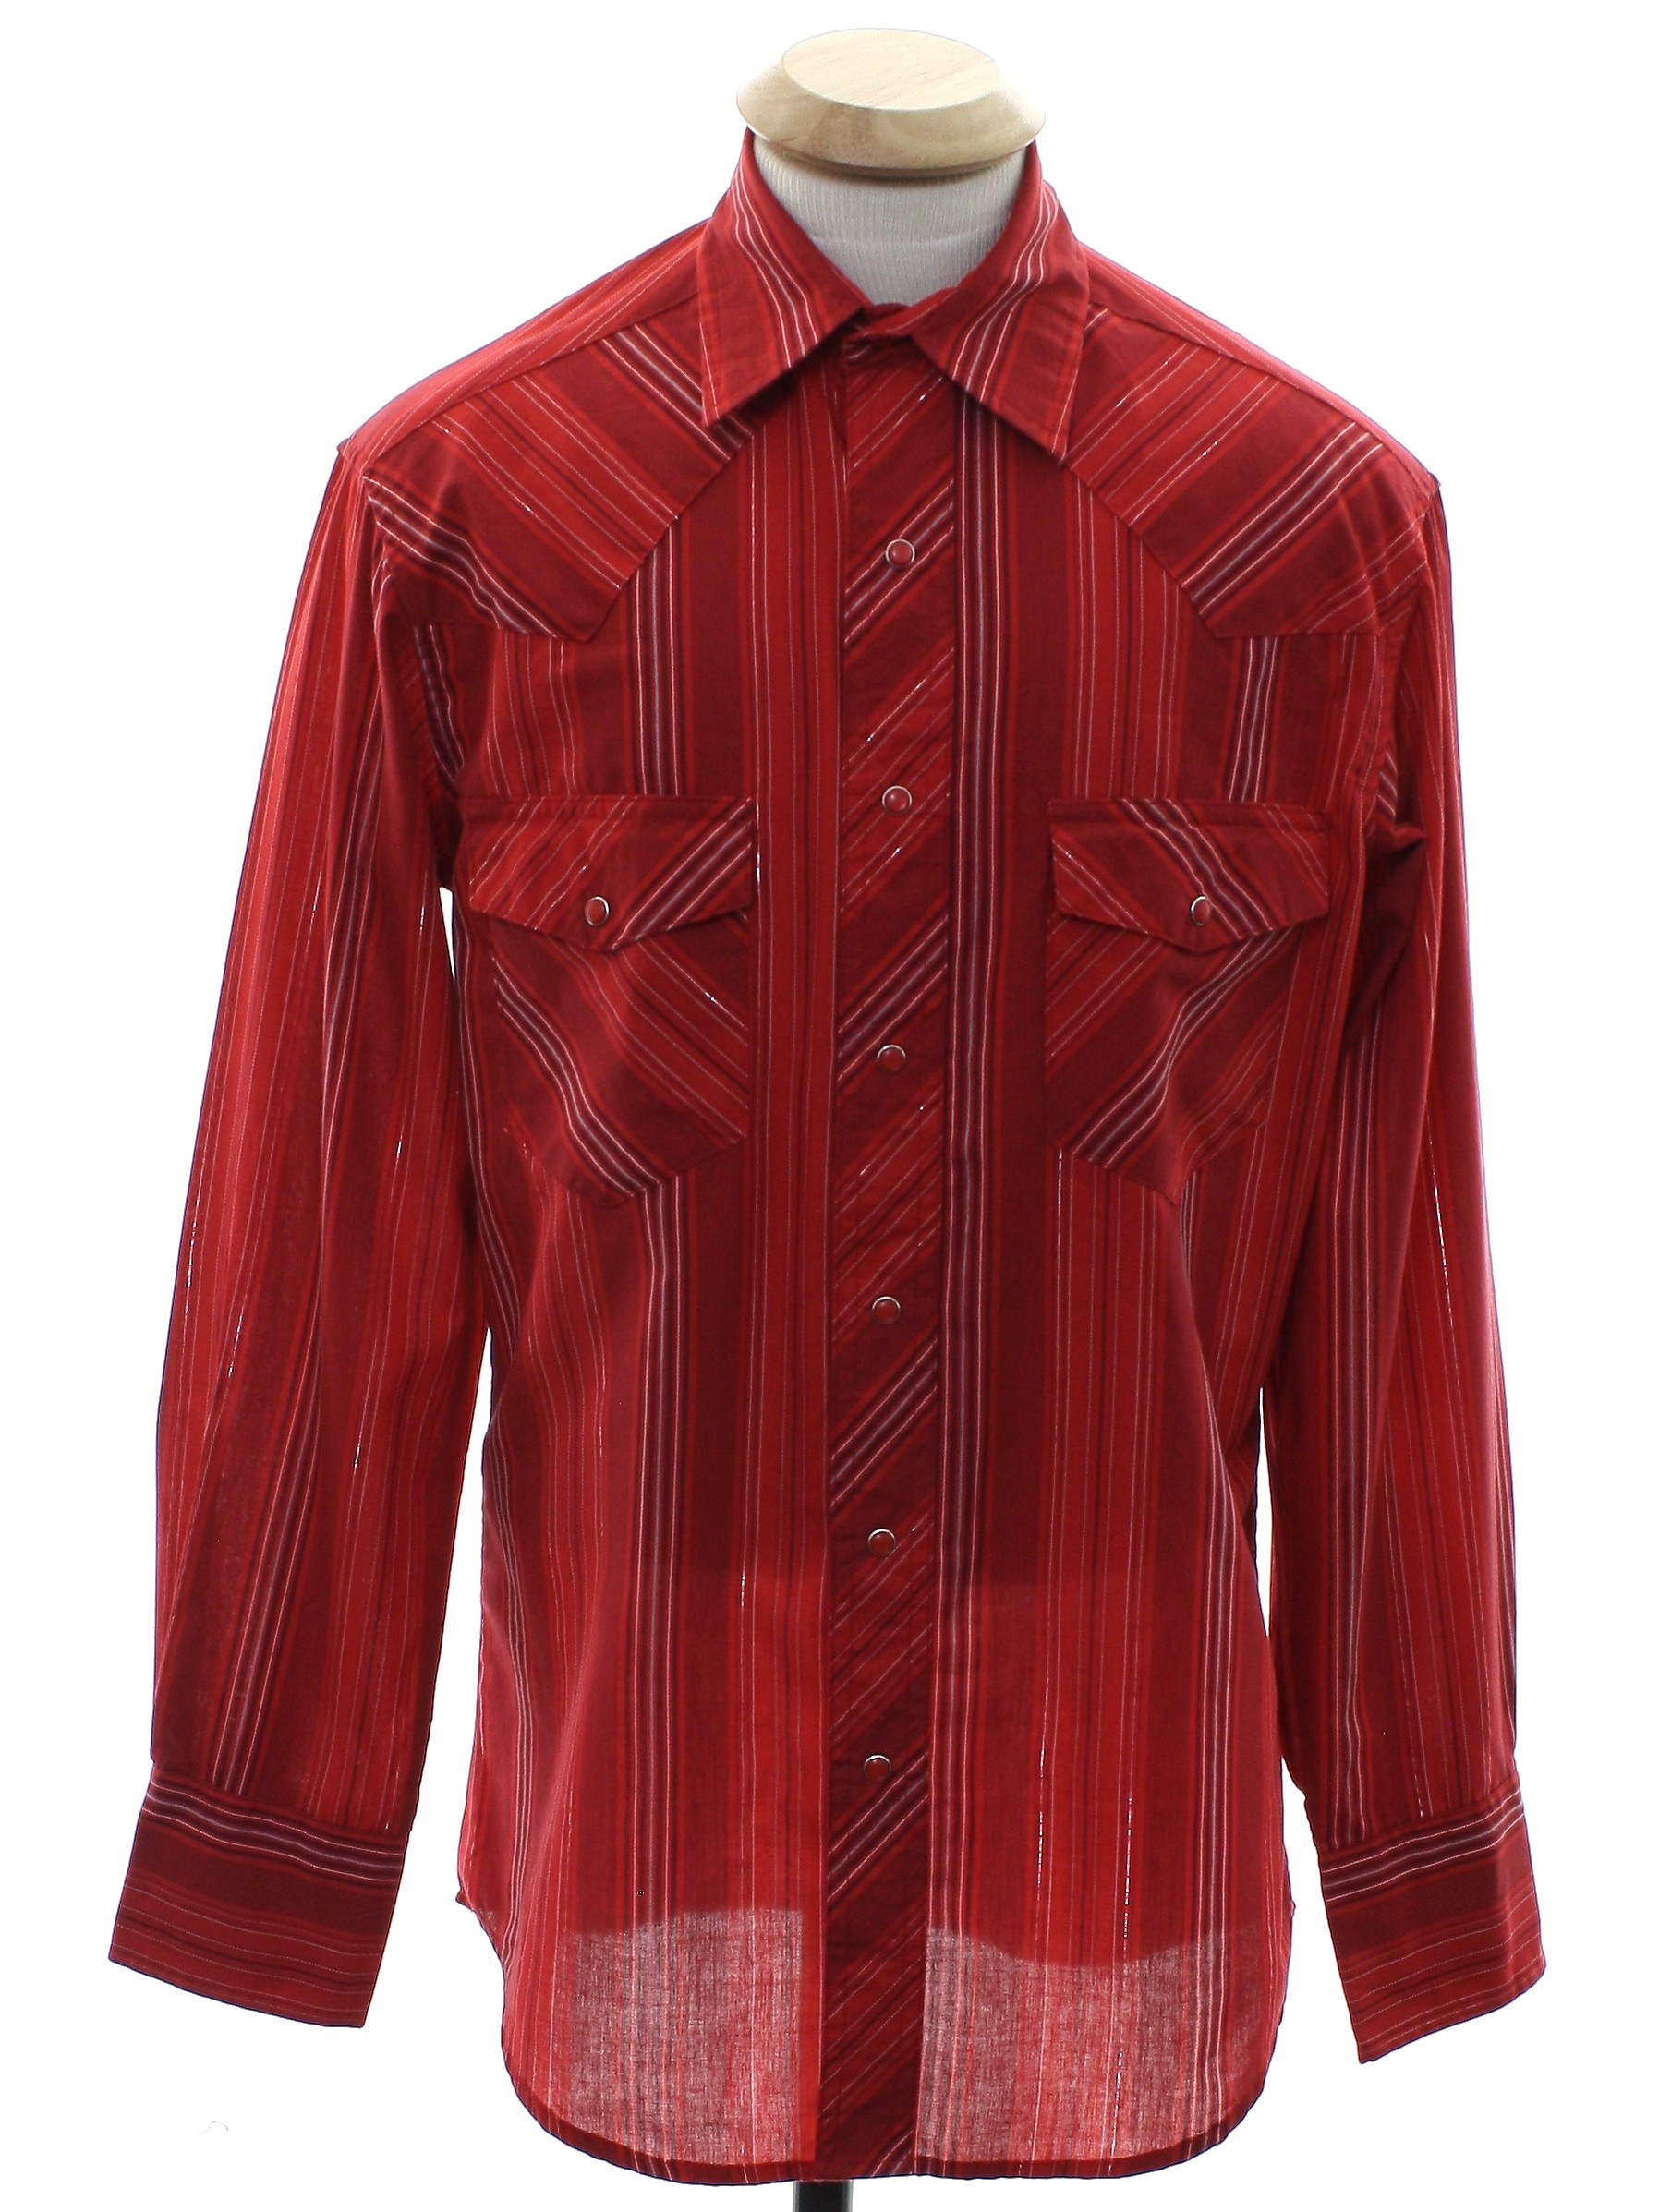 Western Shirt: 90s -Wrangler- Mens red background cotton polyester ...